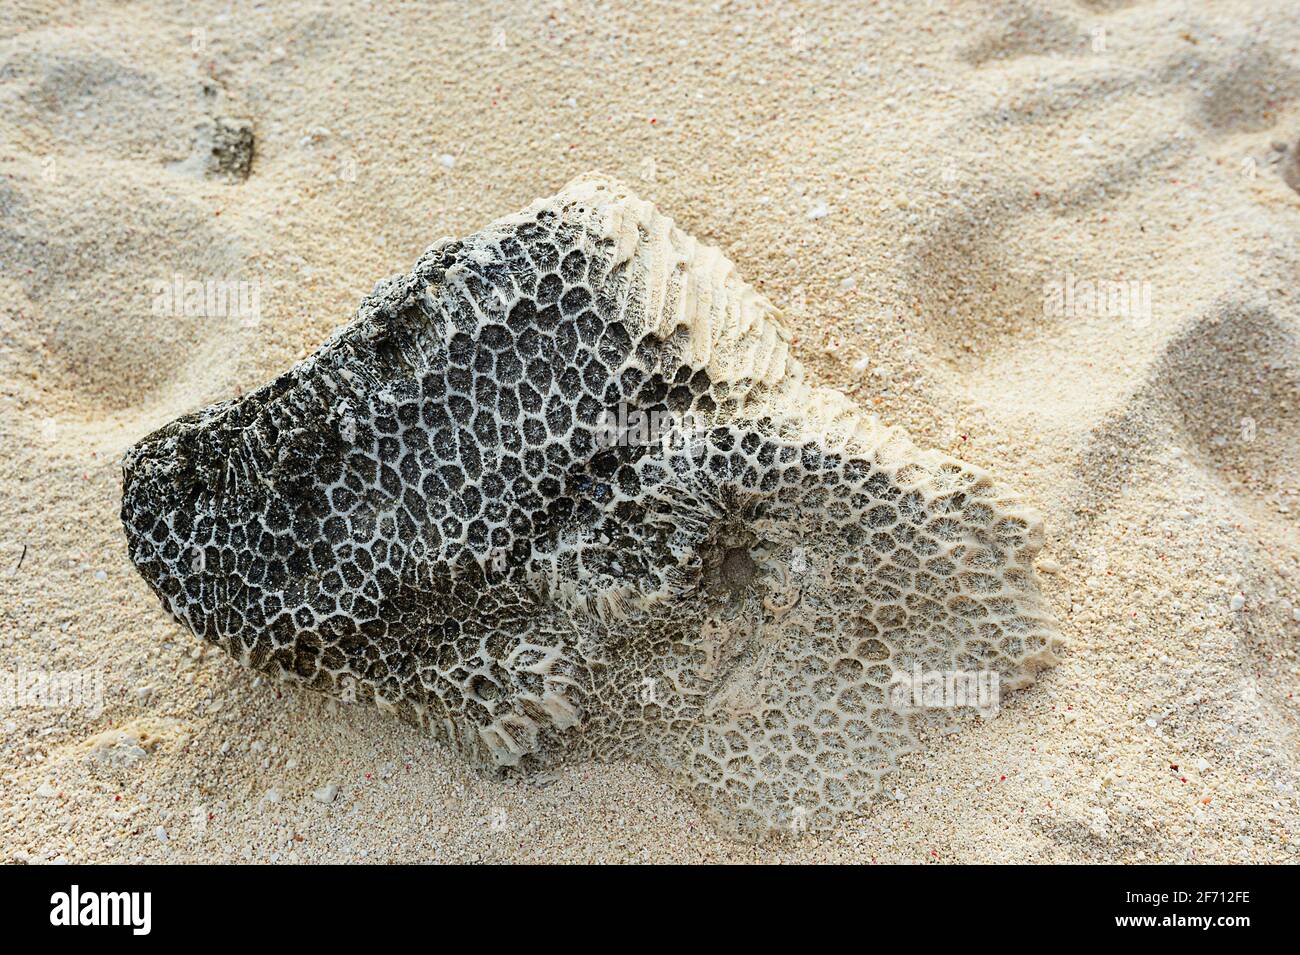 Dead coral on the beach, Heron Island, Southern Great Barrier Reef, Queensland, QLD, Australia Stock Photo